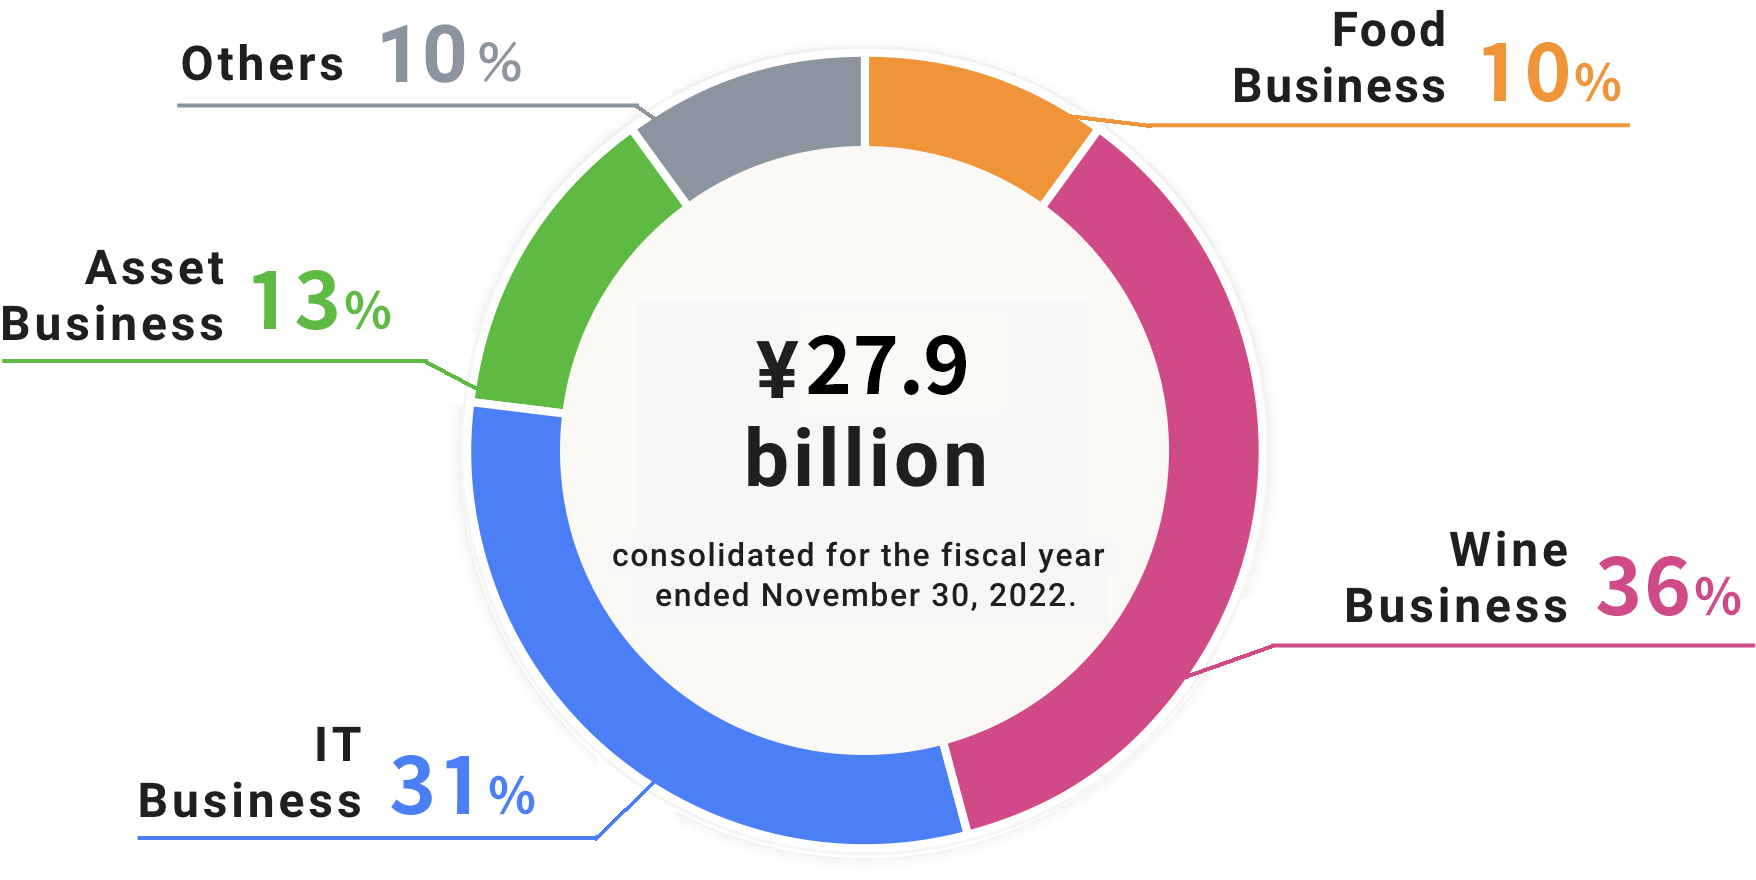 ¥25.4 billion, consolidated for the fiscal year ended November 30, 2021.